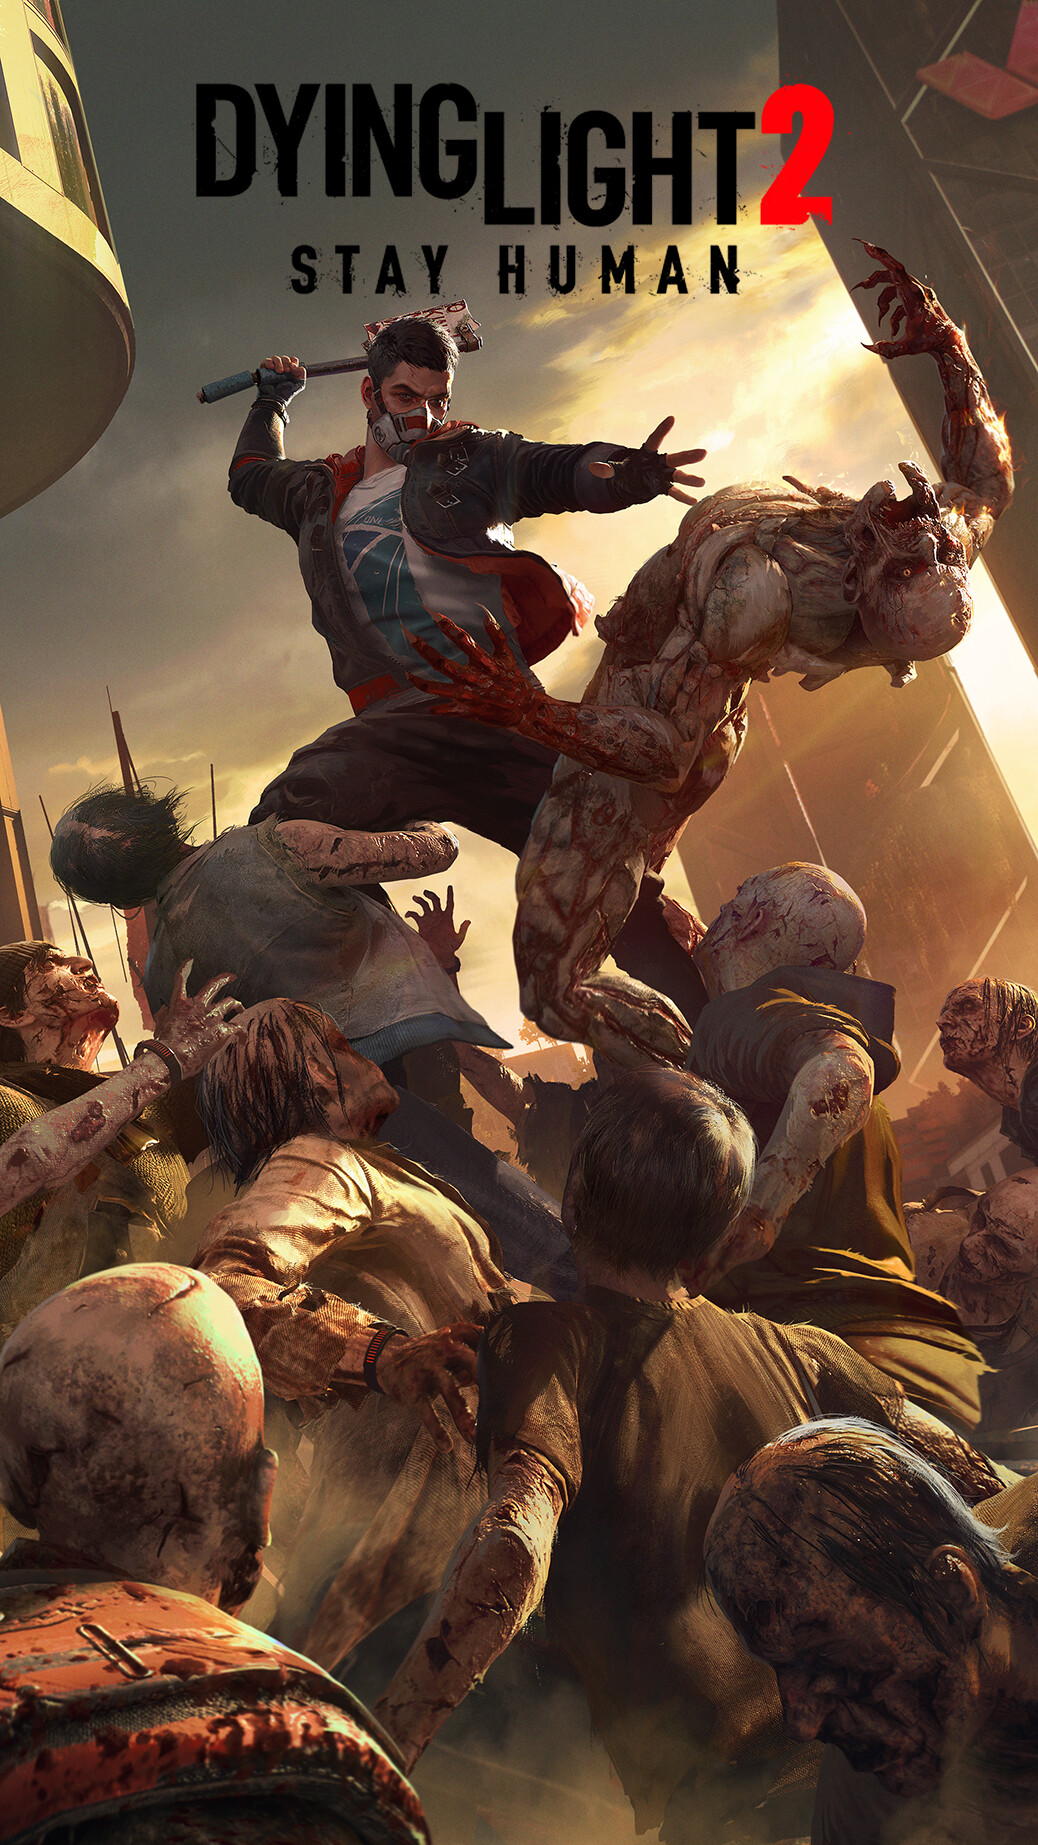 Let's celebrate One Year Anniversary of Dying Light 2 Stay Human